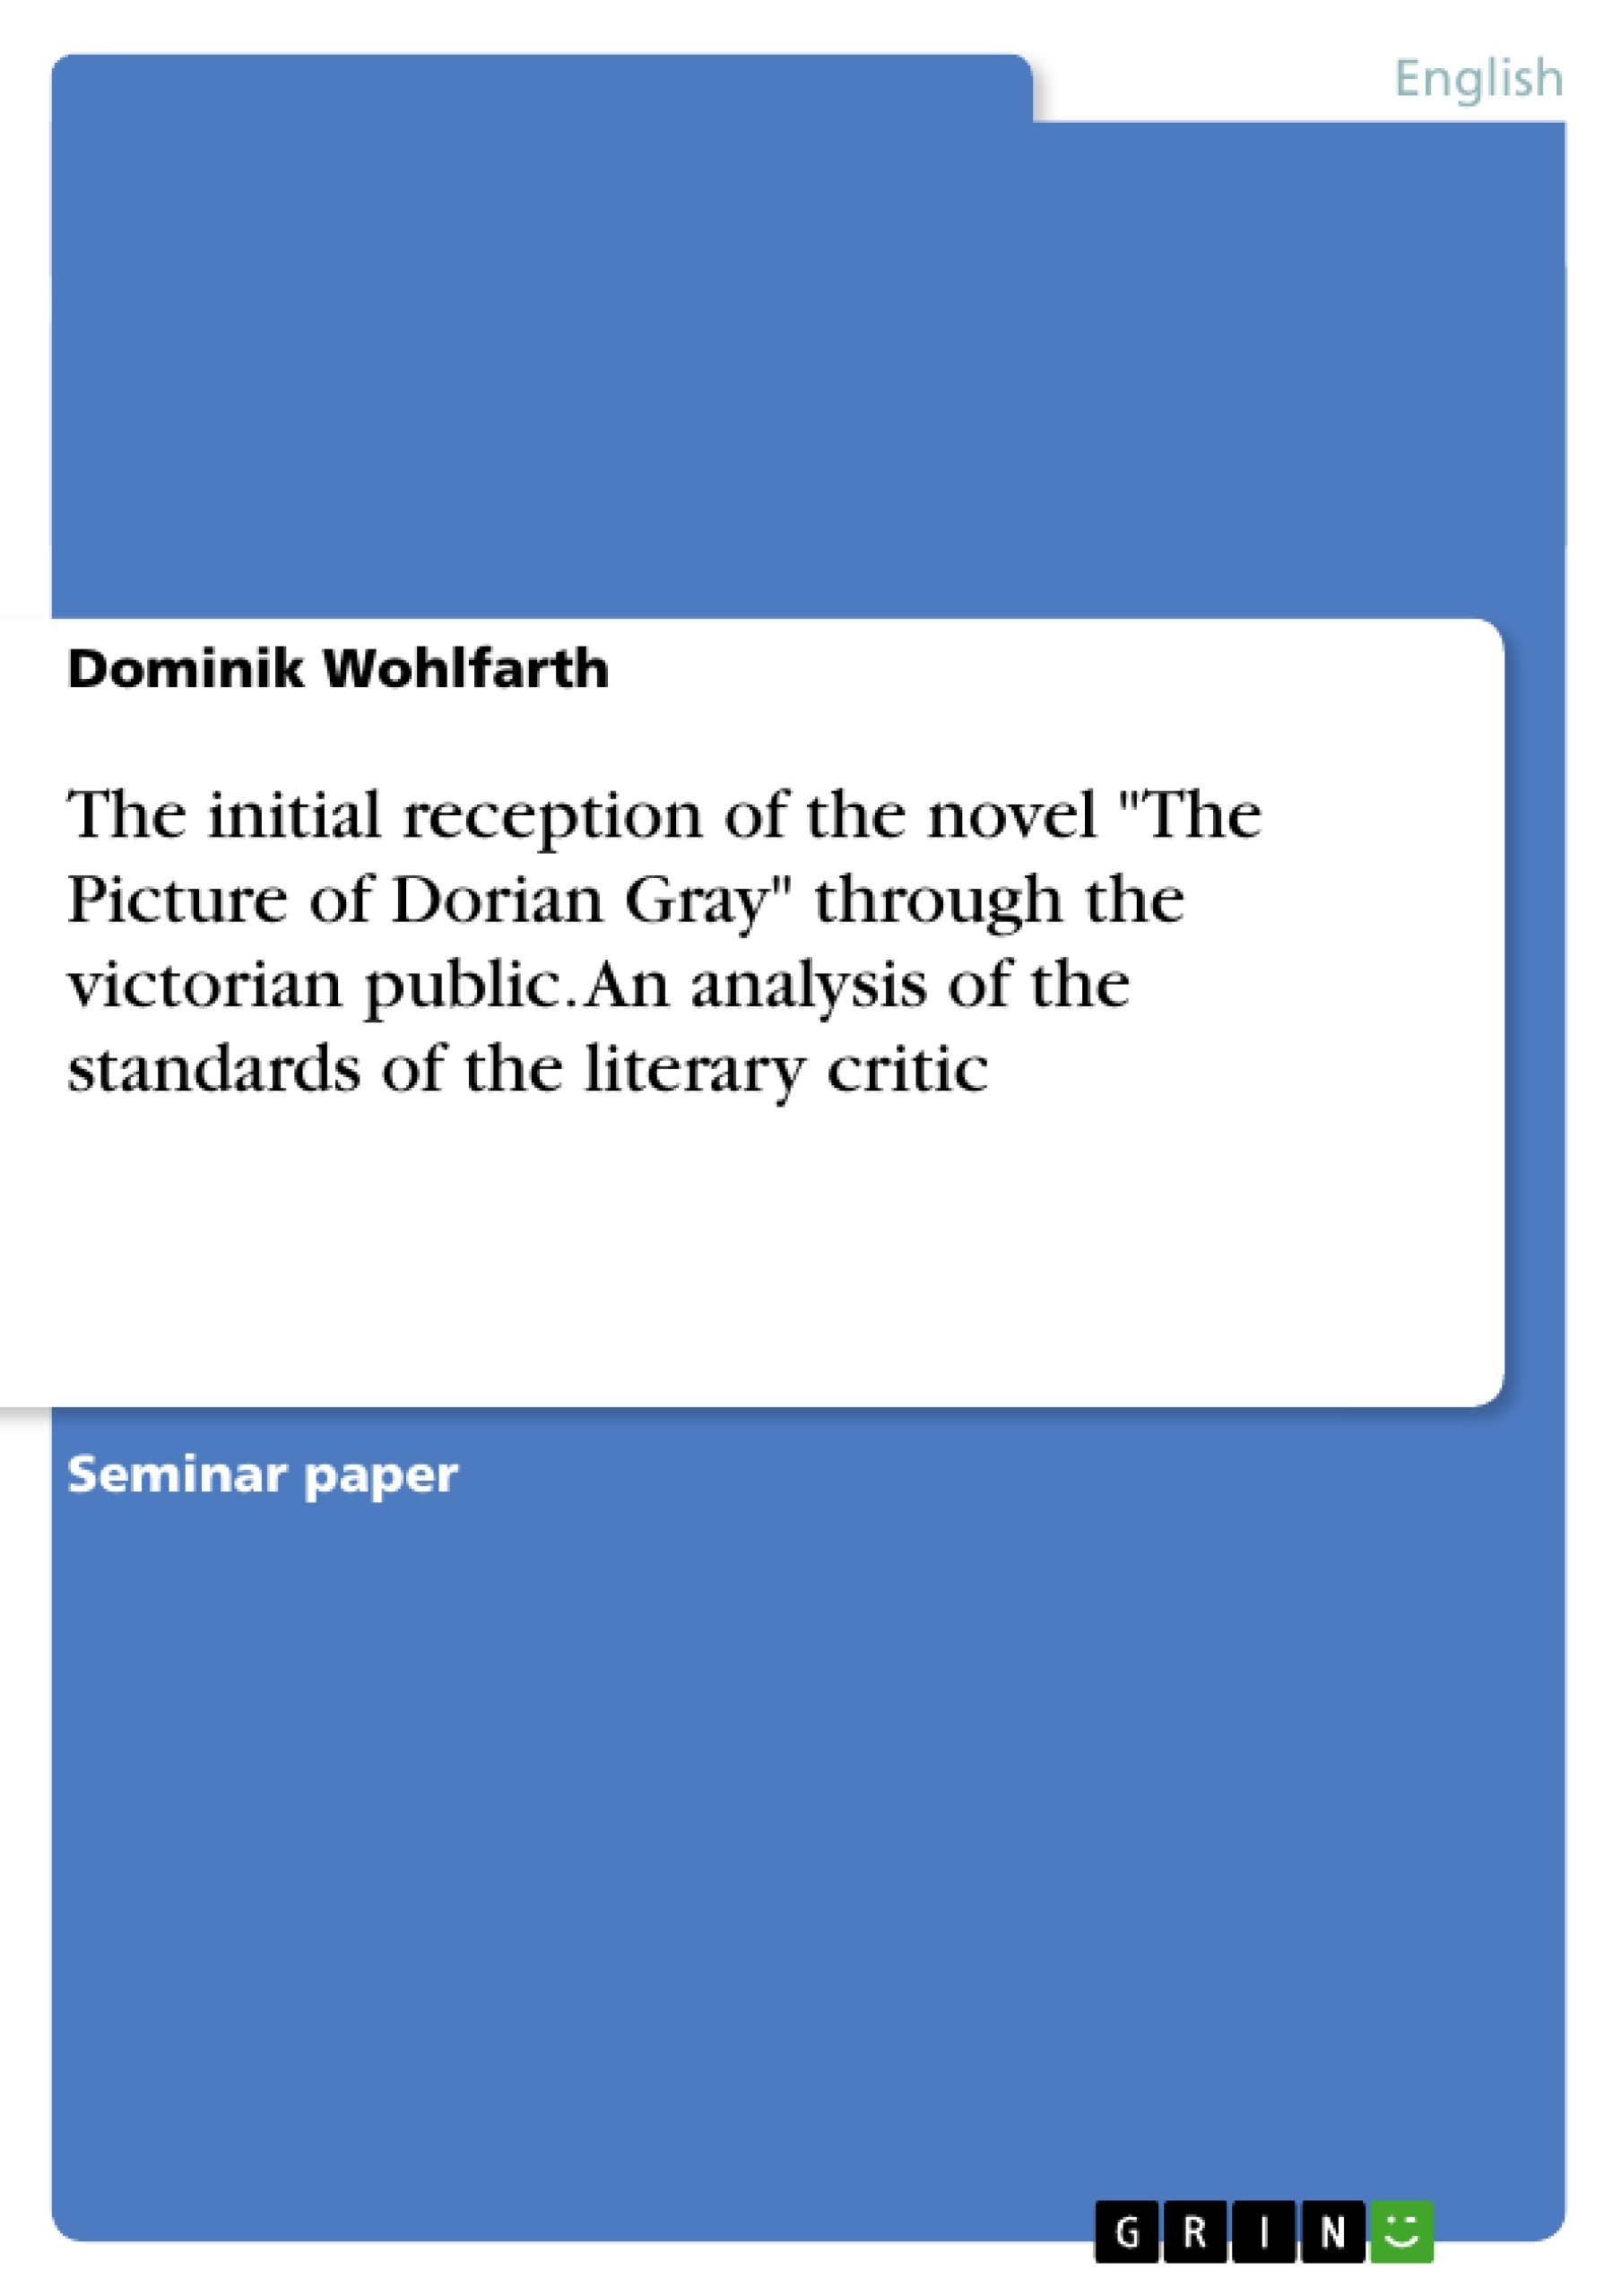 Title: The initial reception of the novel "The Picture of Dorian Gray" through the victorian public. An analysis of the standards of  the literary critic